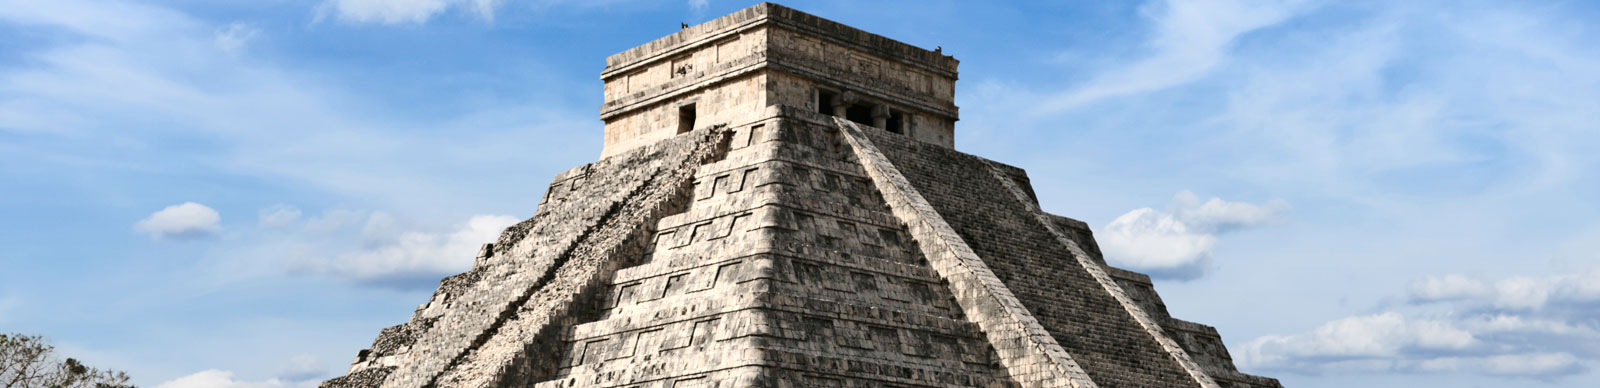 Chichén Itzá – One of the New Seven Wonders of the World